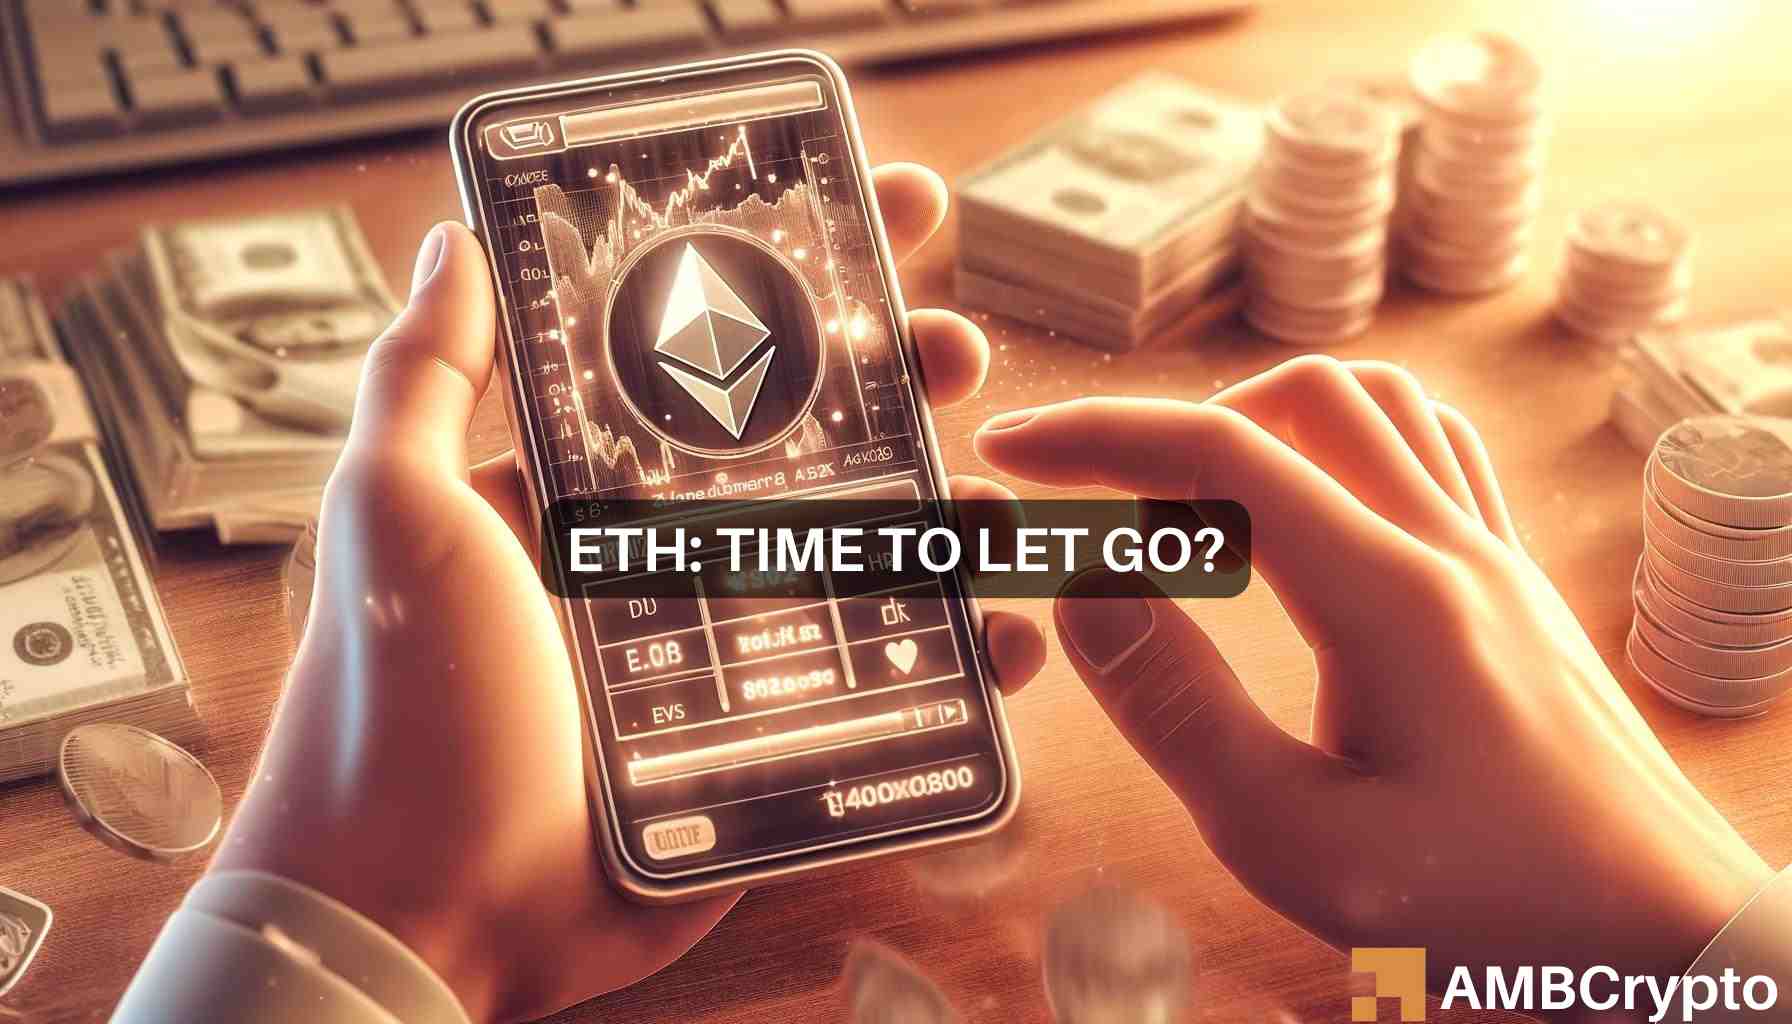 Ethereum co-founder cashes out! Is now the time to sell your ETH?